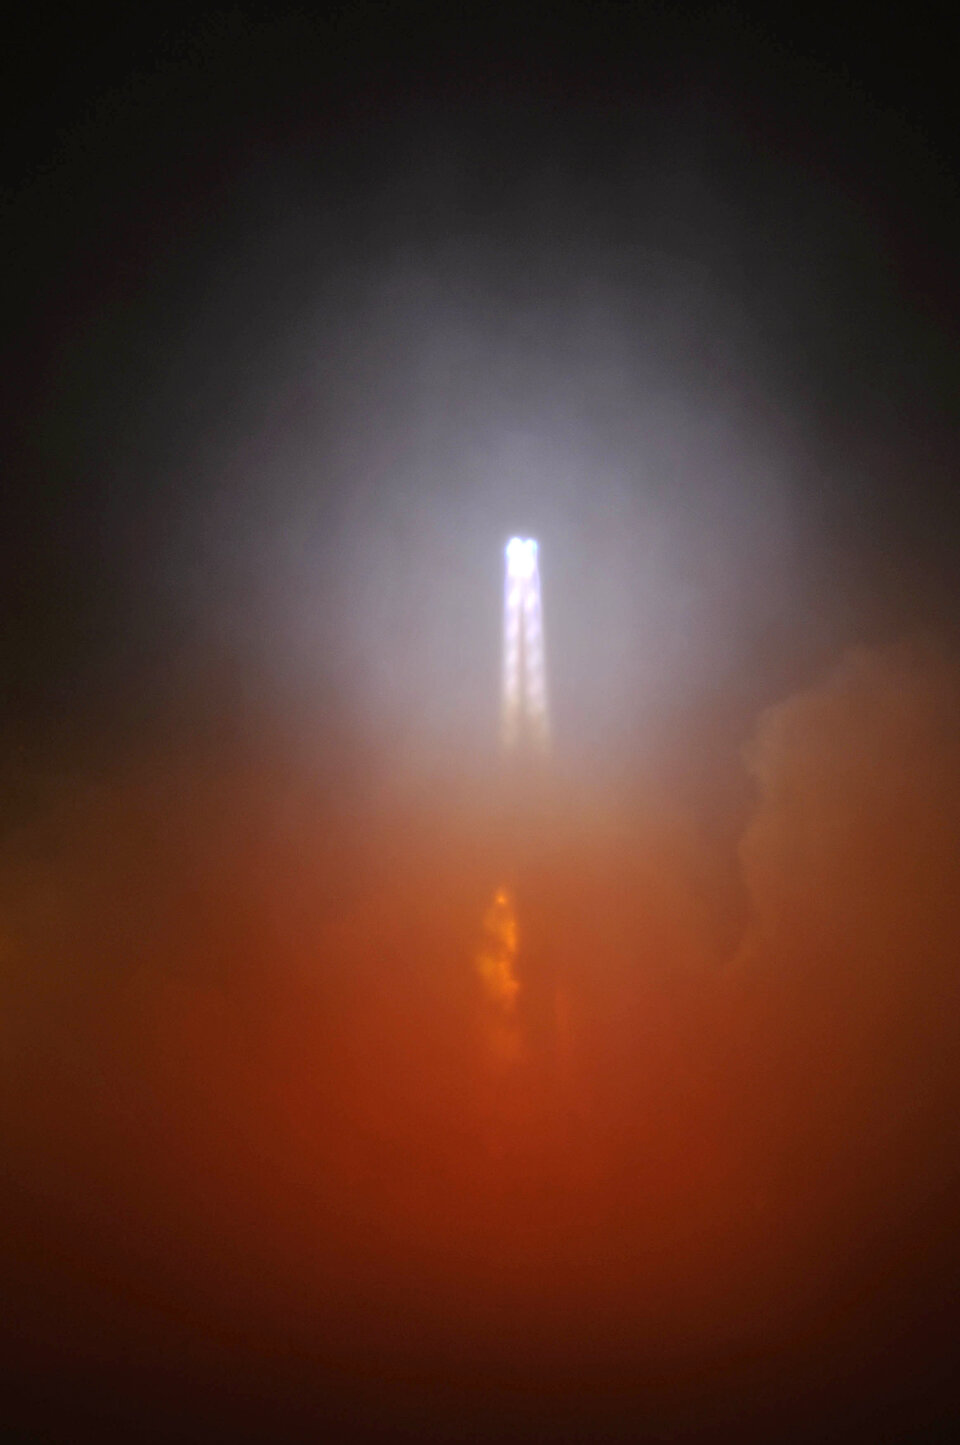 Proba-2 lifting off with SMOS